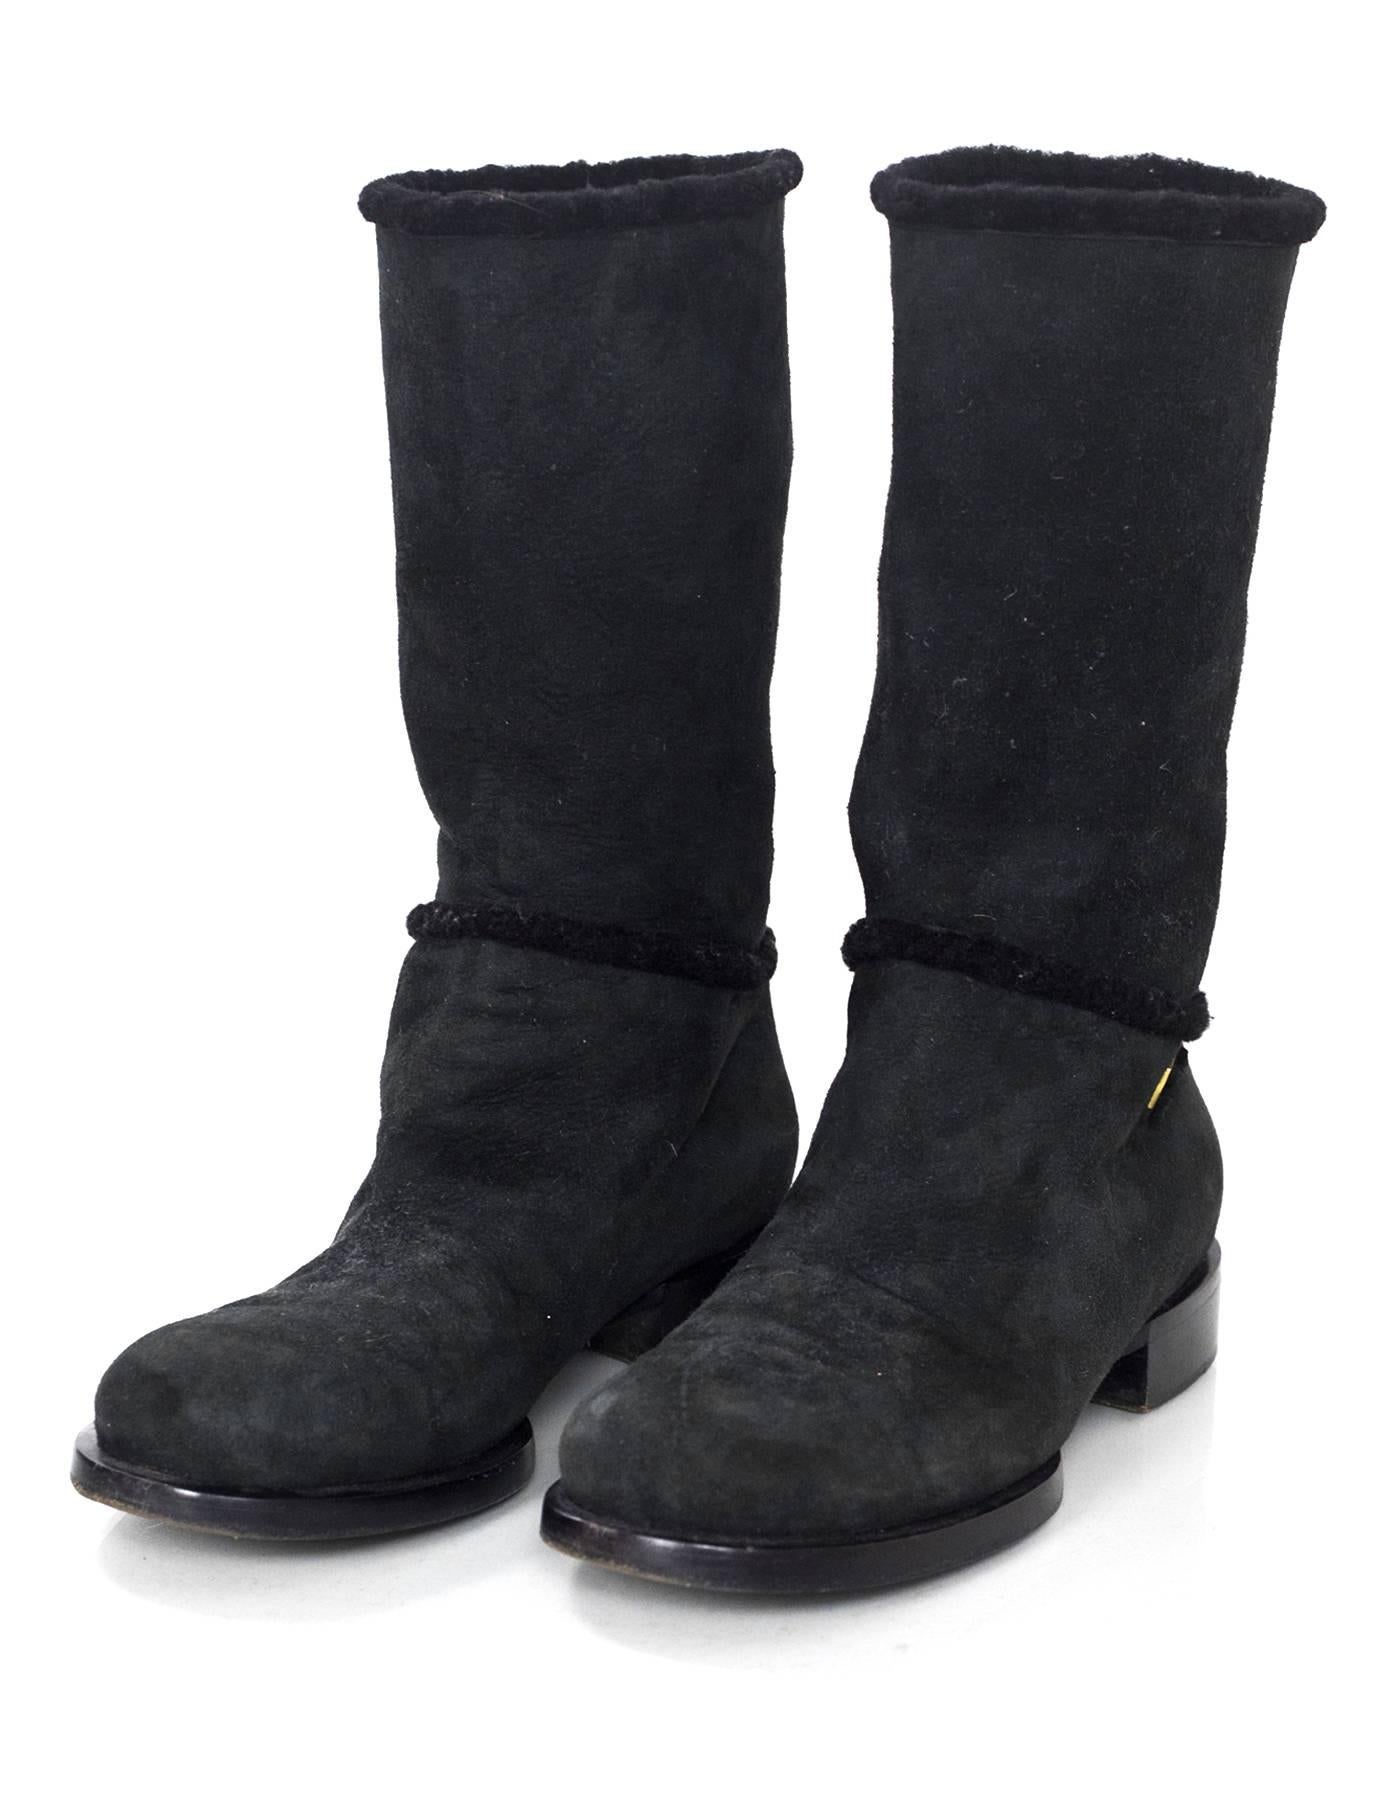 Chanel Black Shearling Short Boots Sz 37.5

Made In: Italy
Color: Black
Materials: Shearling
Closure/Opening: Pull - on
Sole Stamp: CC 37.5 made in italy
Overall Condition: Very good pre-owned condition with the exception of light wear and fading